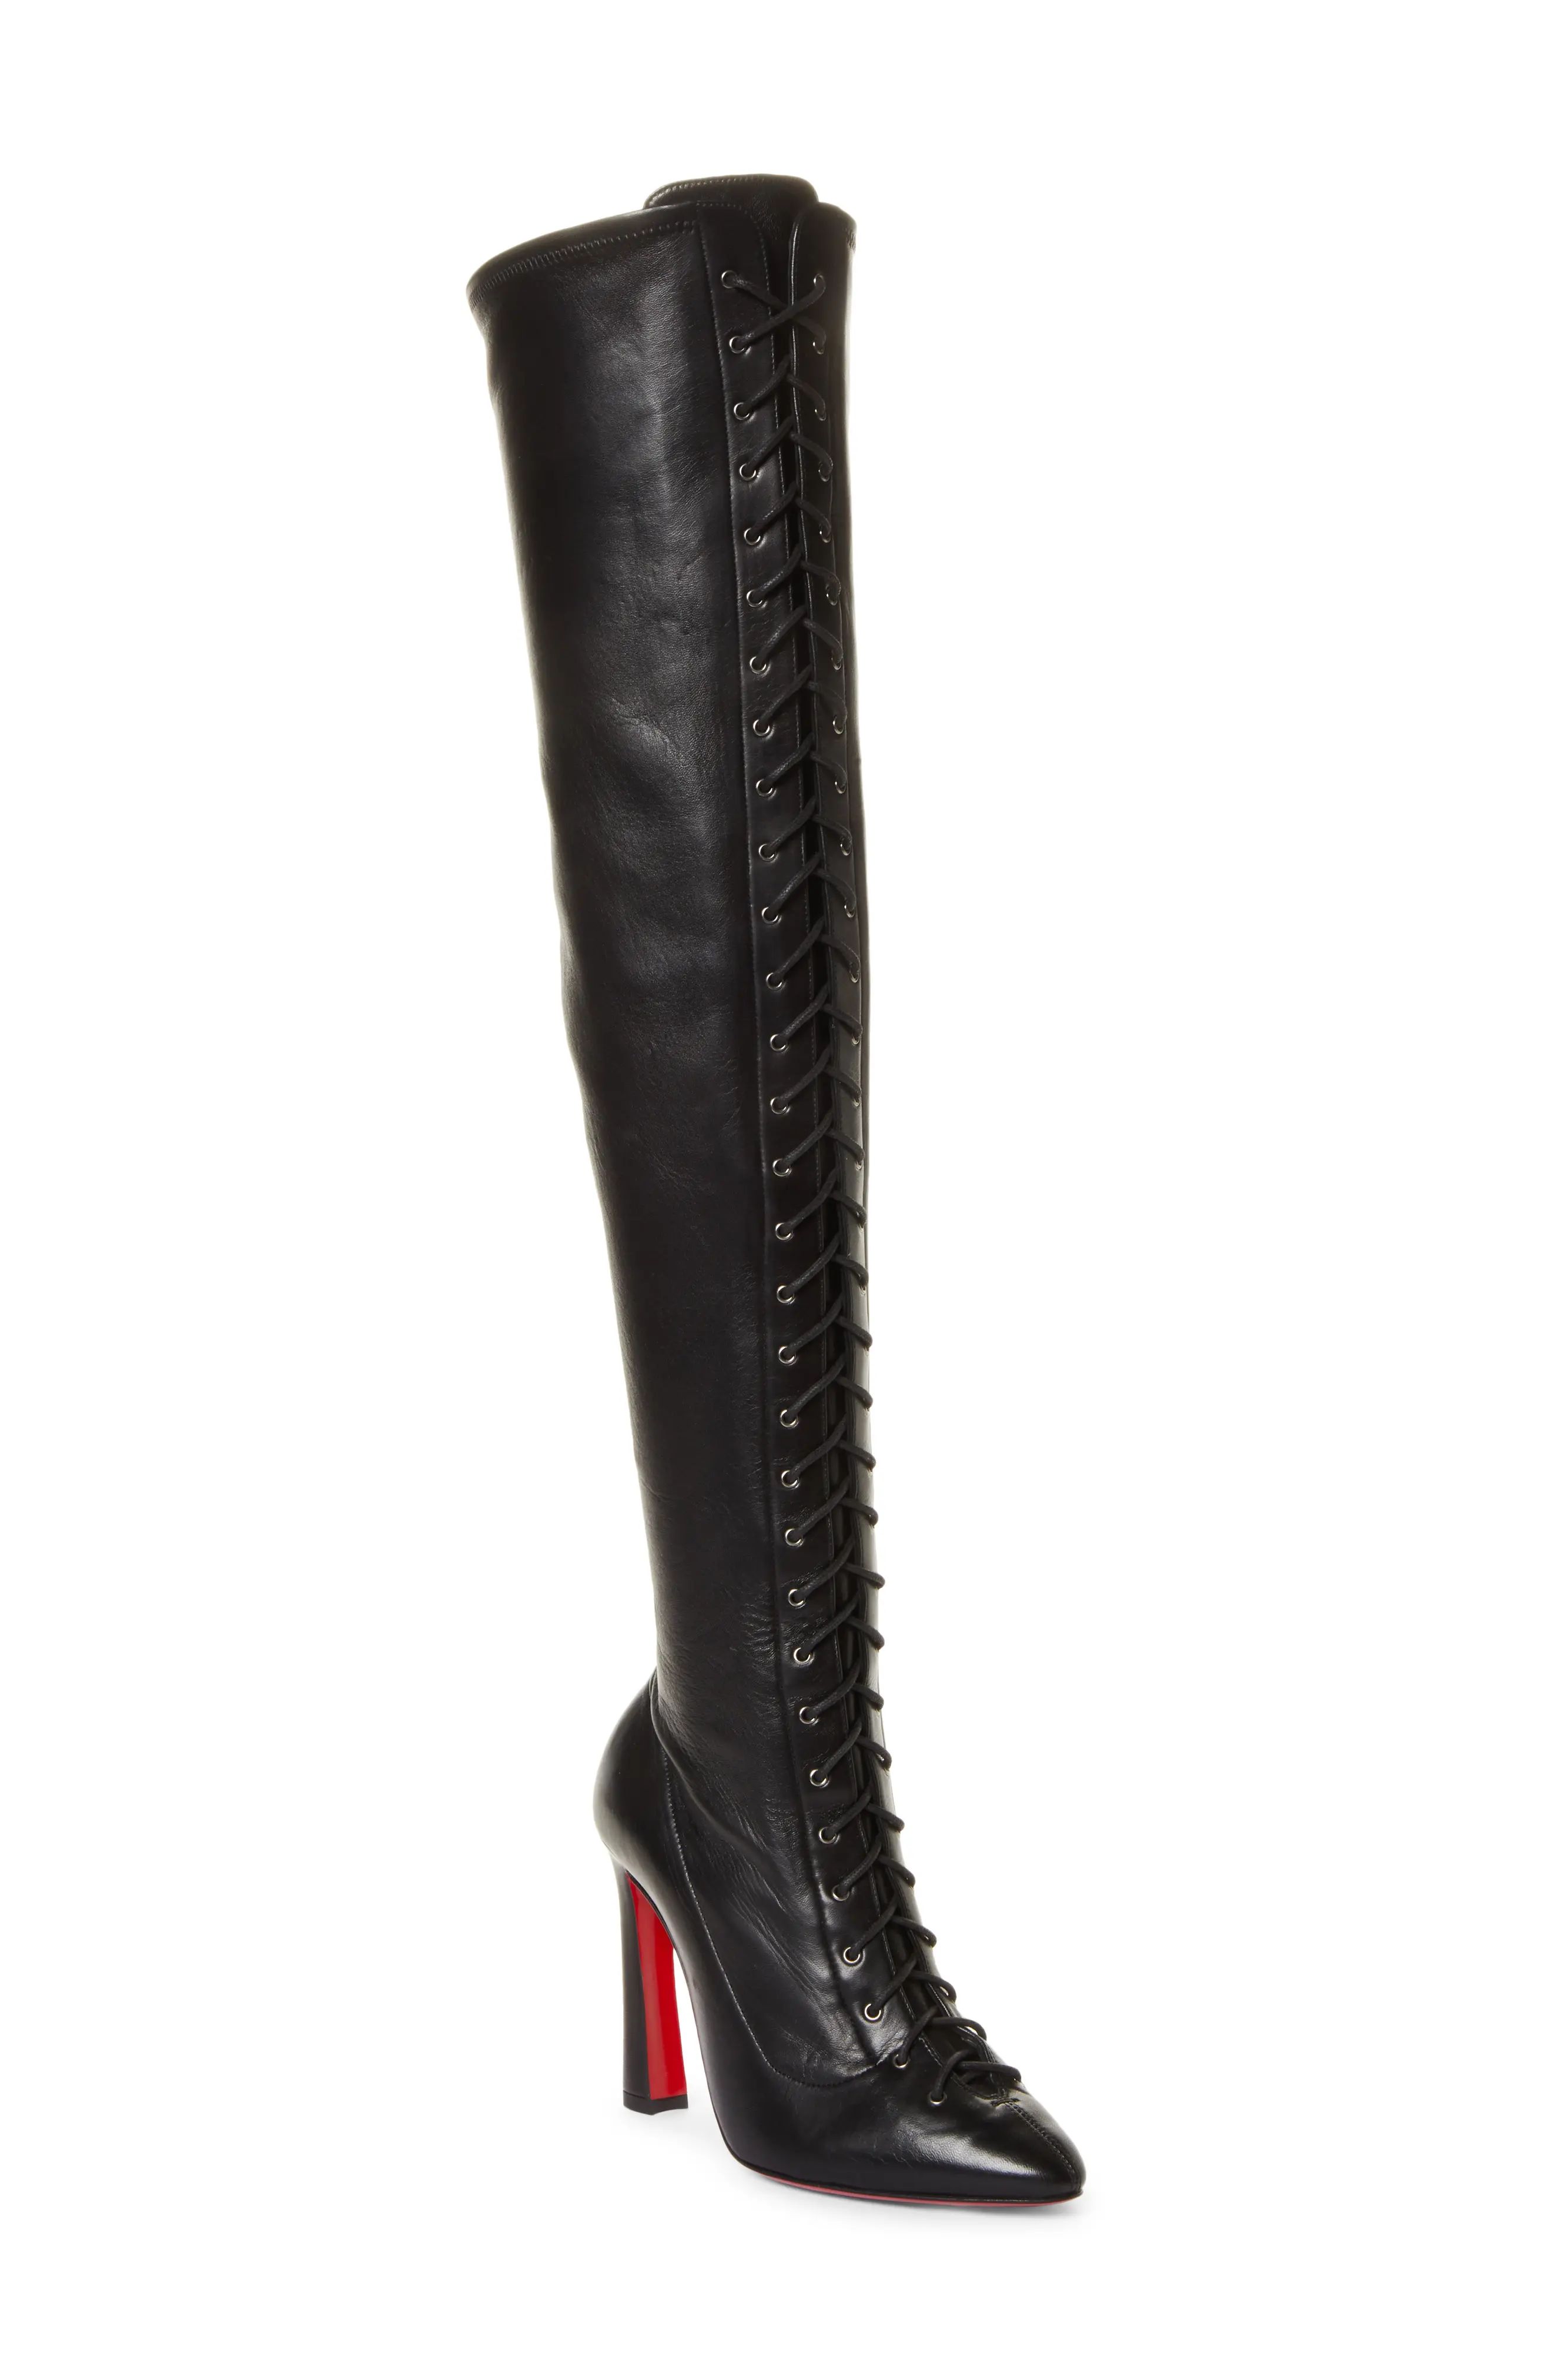 Christian Louboutin Anjel Alta Over the Knee Boot, Size 7Us in Black at Nordstrom | Nordstrom